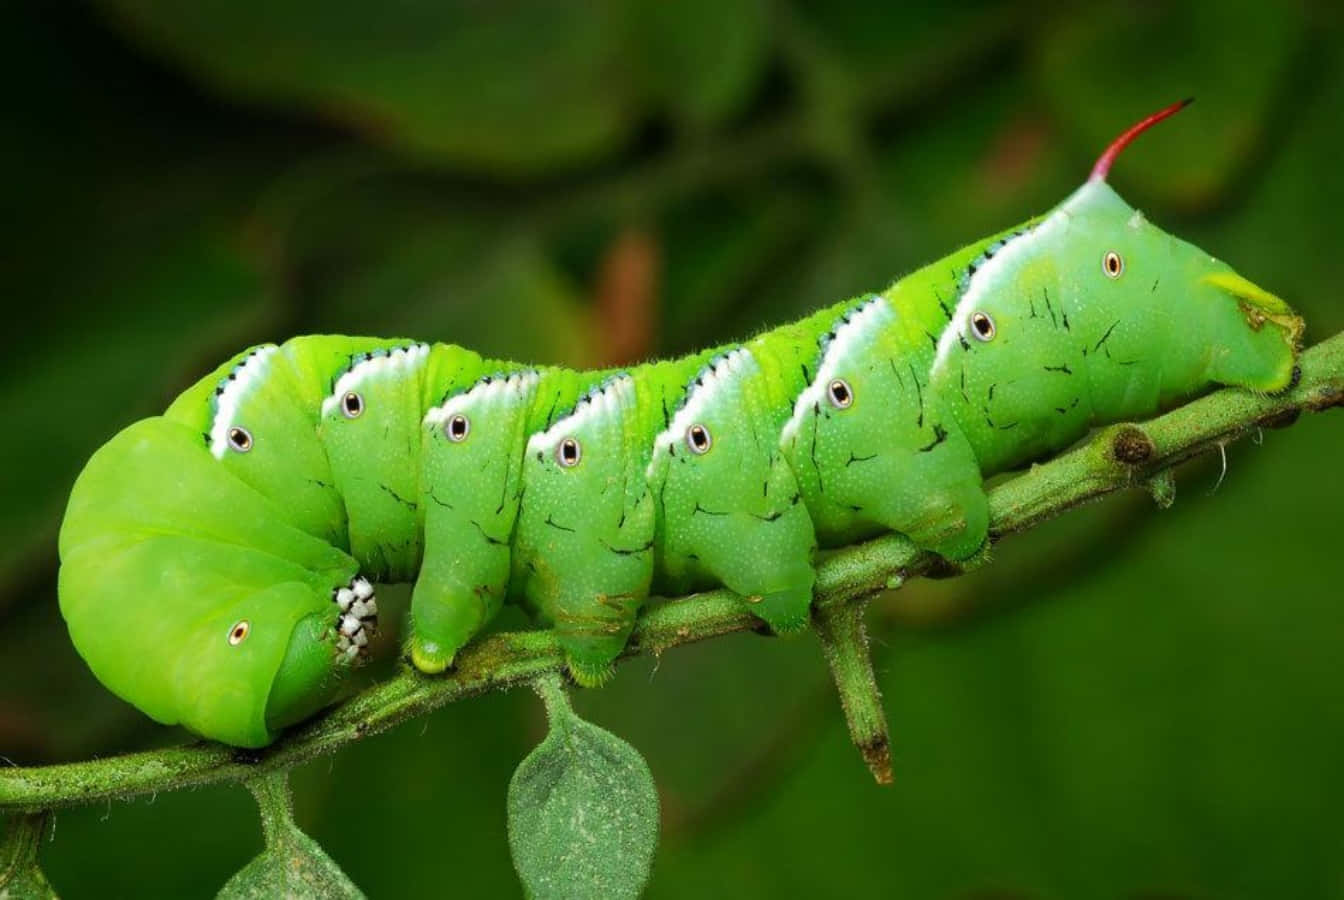 Colorful caterpillar insect enjoying a meal